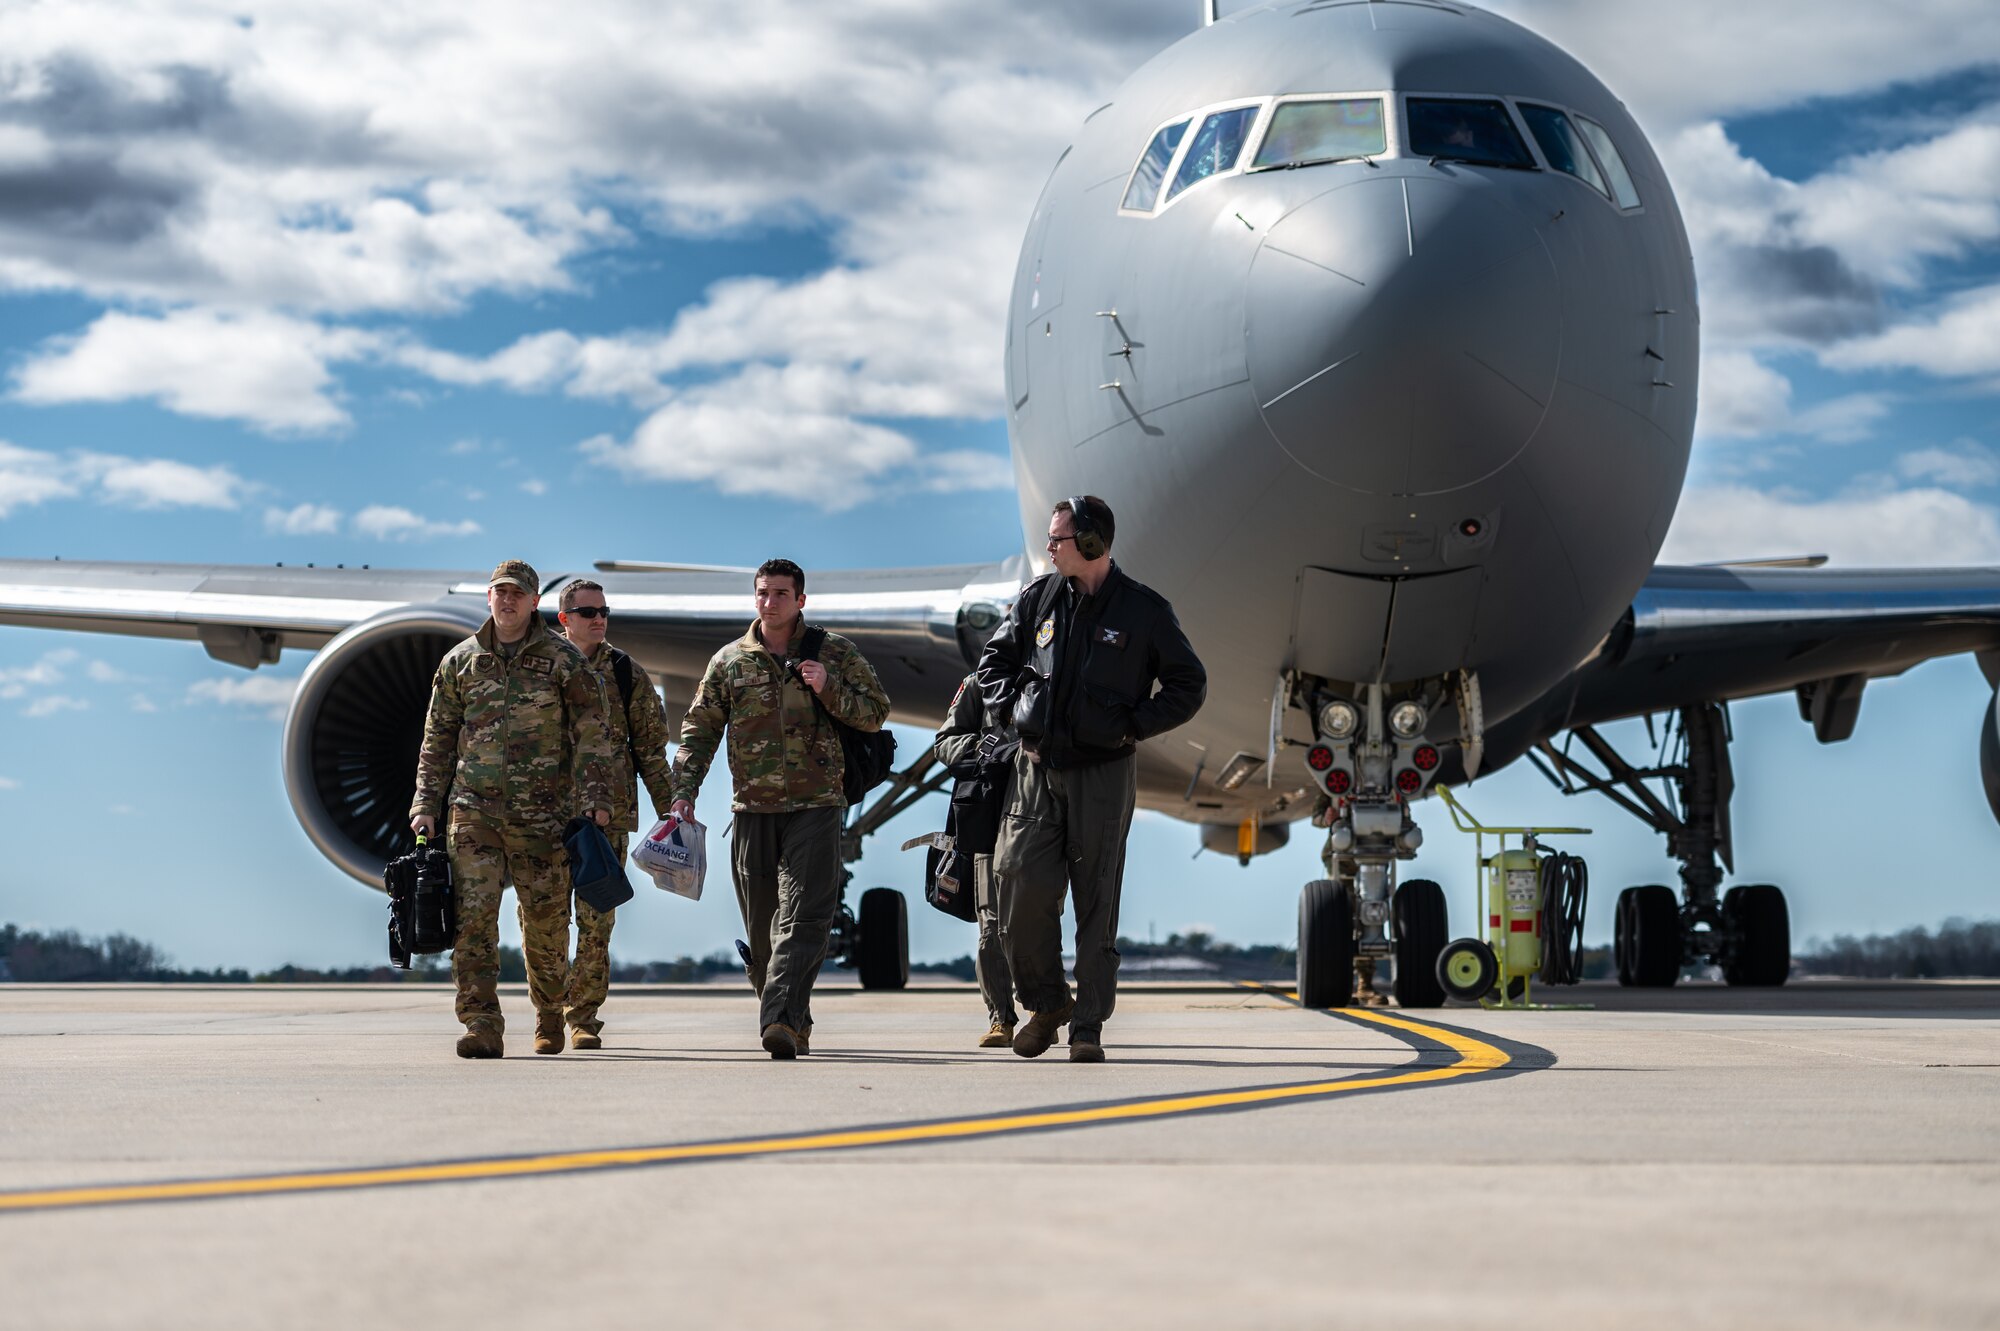 U.S. Air Force Airmen assigned to the 305th Air Mobility Wing conduct an Engine Running Crew Change (ERCC) during exercise White Stag at Joint Base McGuire-Dix-Lakehurst, N.J., March 8, 2023.